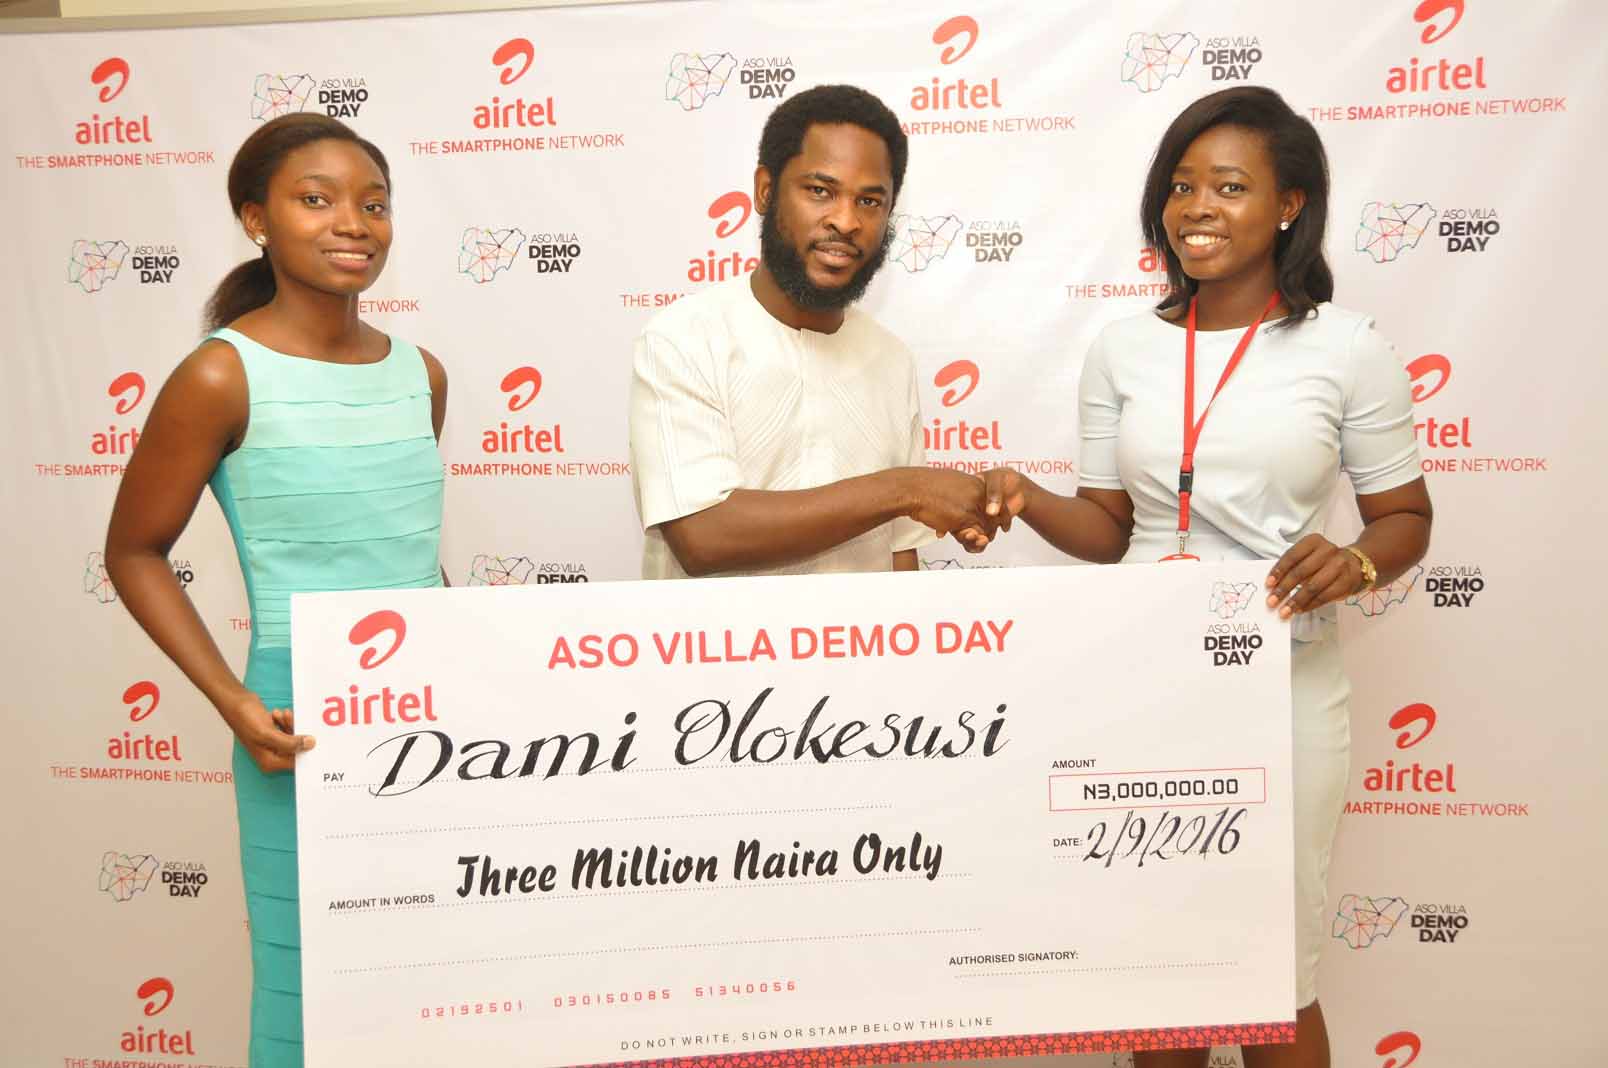 Director, Brand & Advertising, Enitan Denloye flanked by co-founder of Shuttlers, Busola Majekodunmi and founder of Shuttlers, Damilola Olokesusi during the prize presentation to the winners.